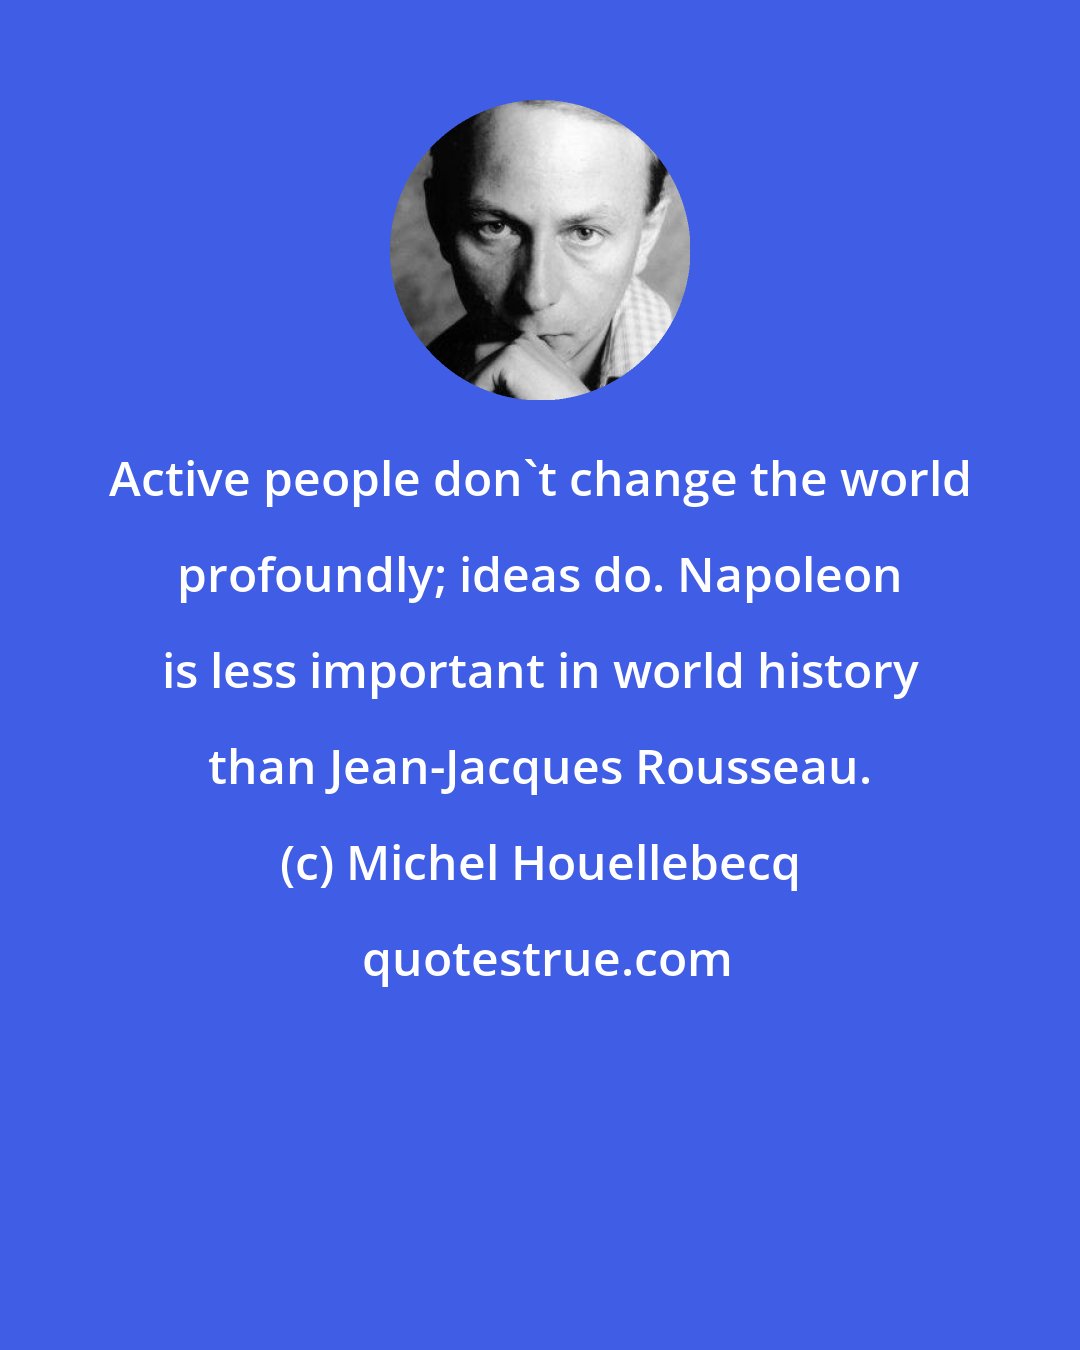 Michel Houellebecq: Active people don't change the world profoundly; ideas do. Napoleon is less important in world history than Jean-Jacques Rousseau.